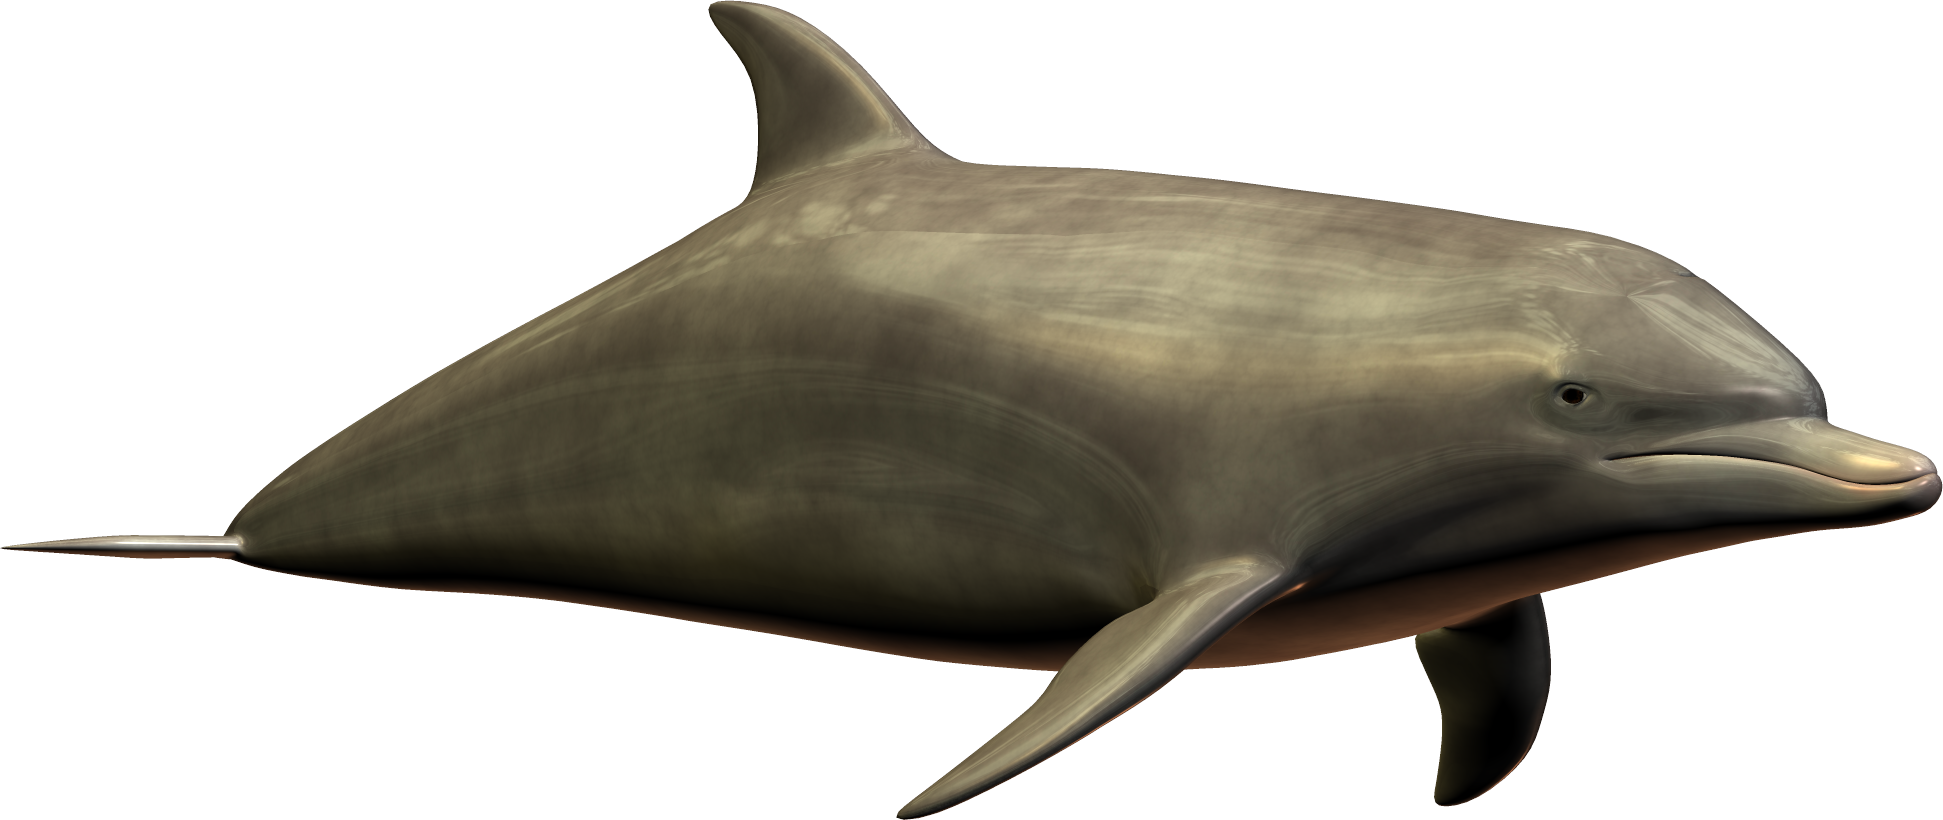 dolphin png image collection for download #22004